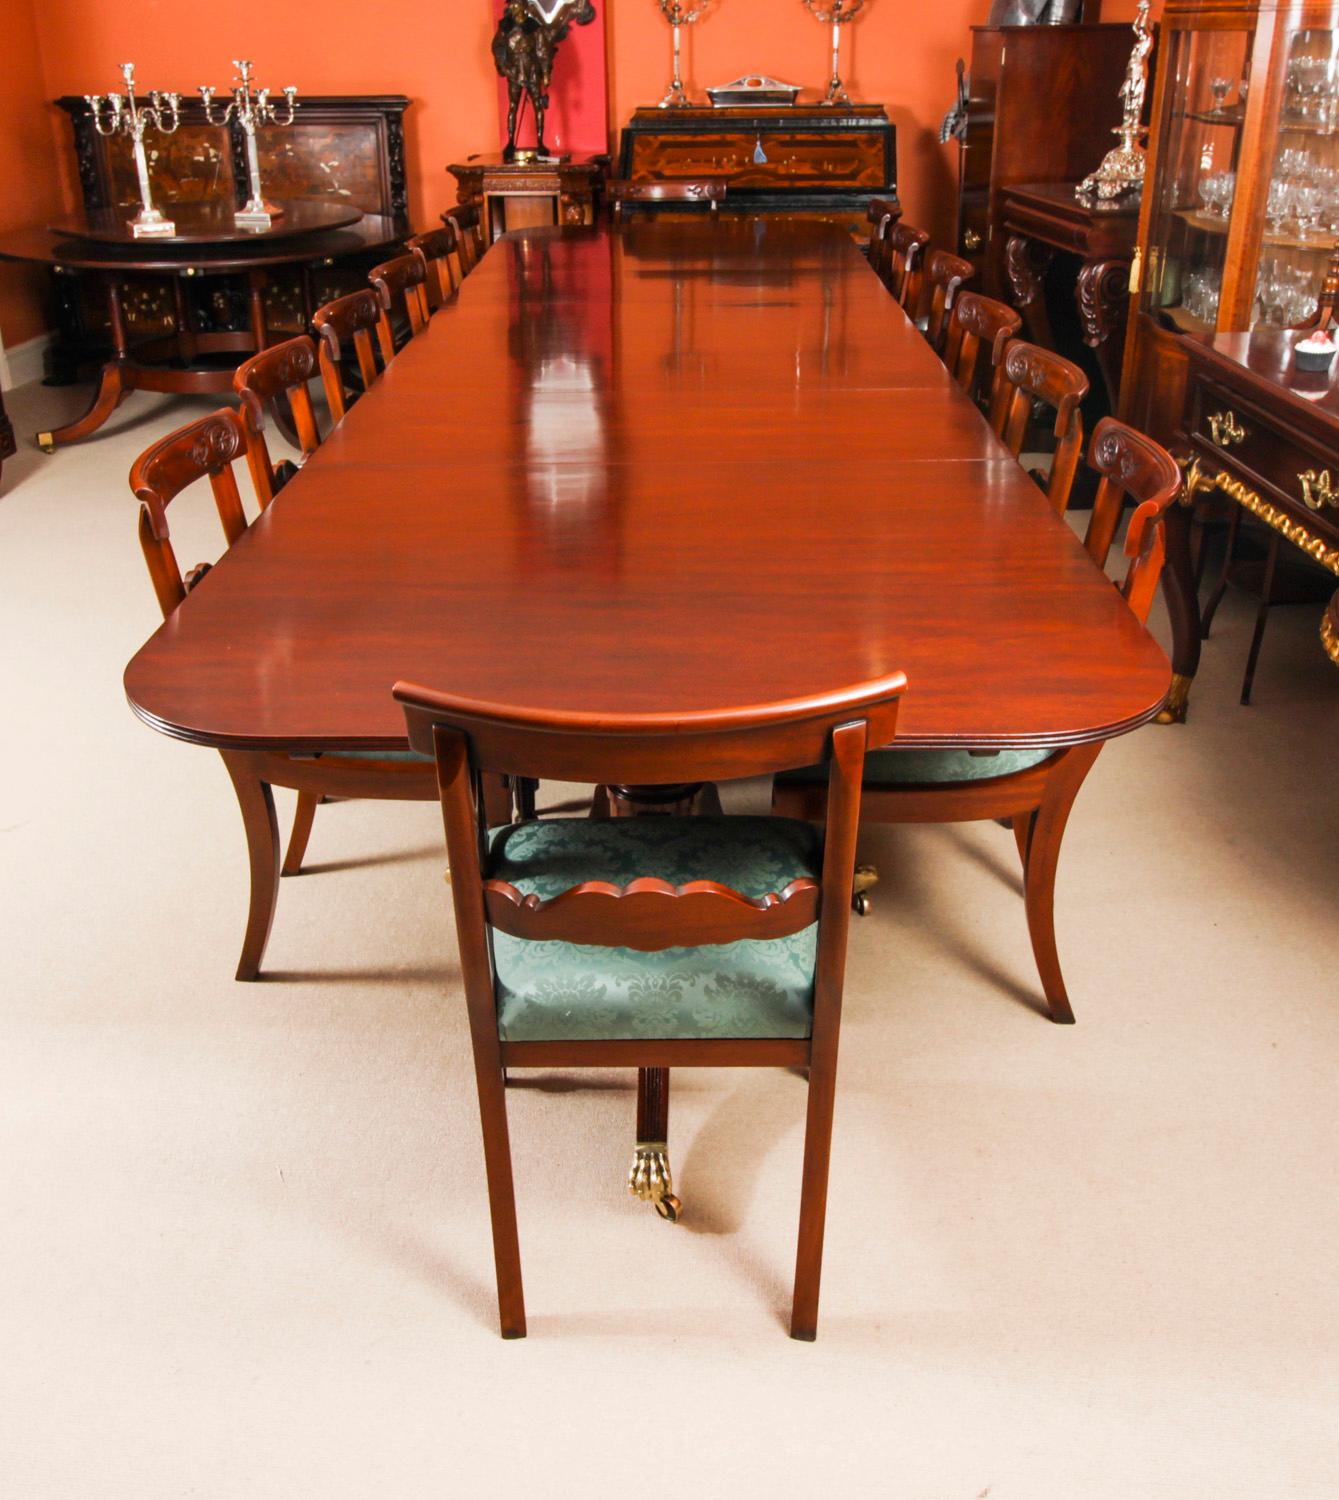 This is a superb dining set comprising a large Vintage handmade dining table in elegant George III style, by the master cabinetmakers Arthur Brett & Son, Norwich, mid-20th C in date, and the matching set of fourteen dining chairs.
The triple